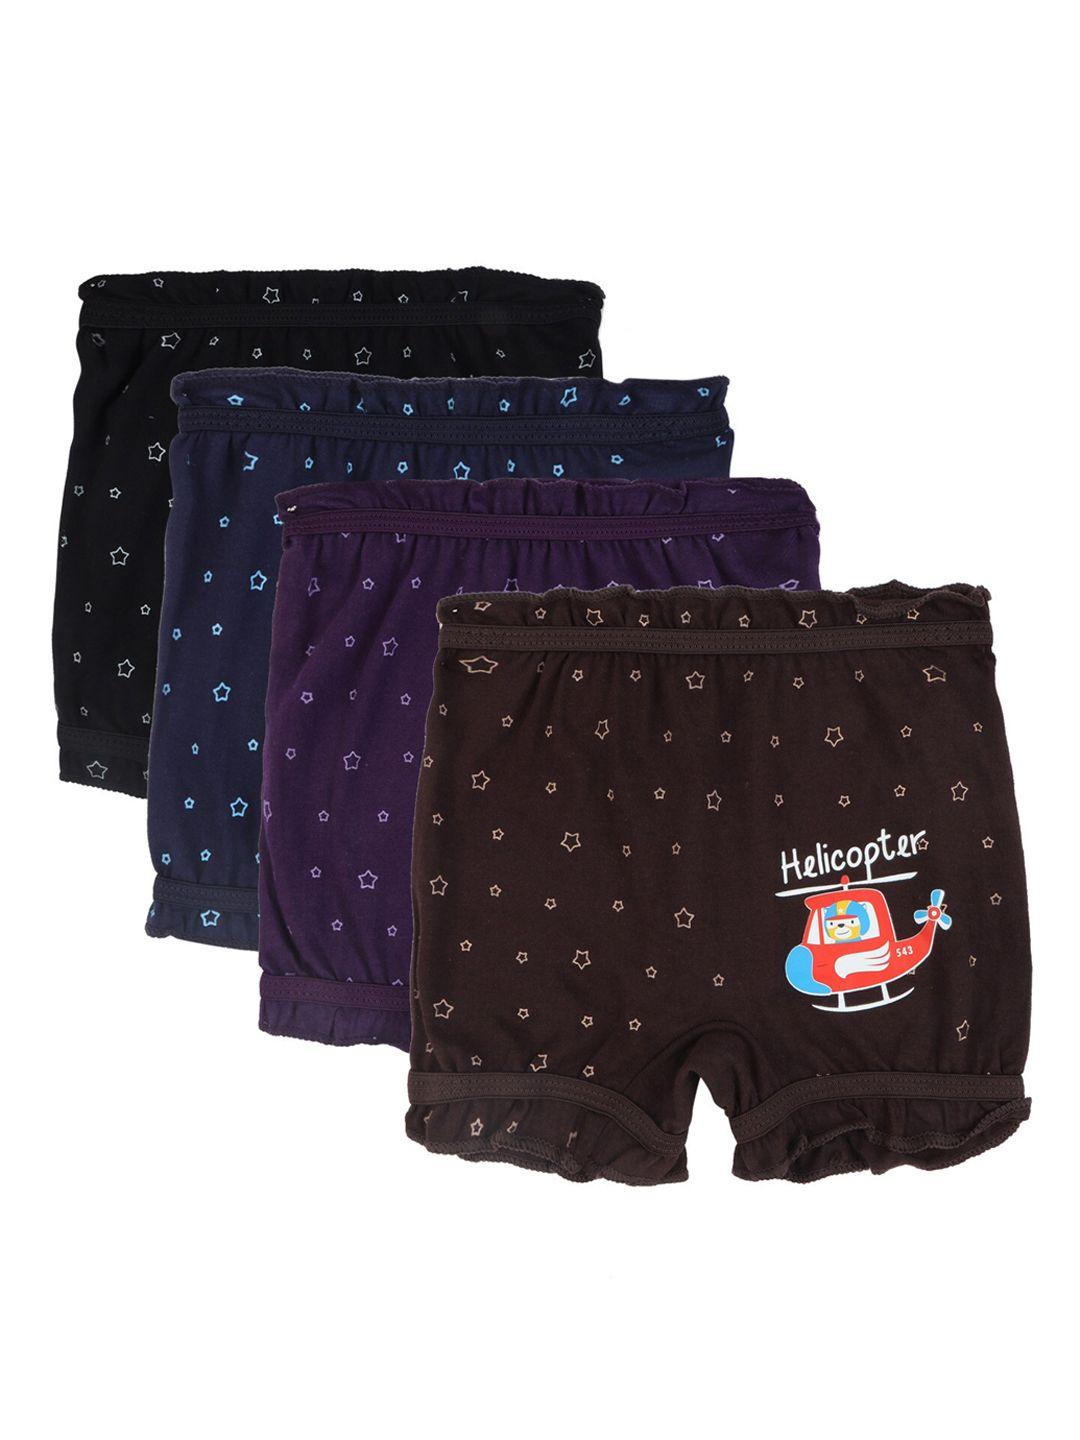 dyca kids pack of 6 assorted printed briefs